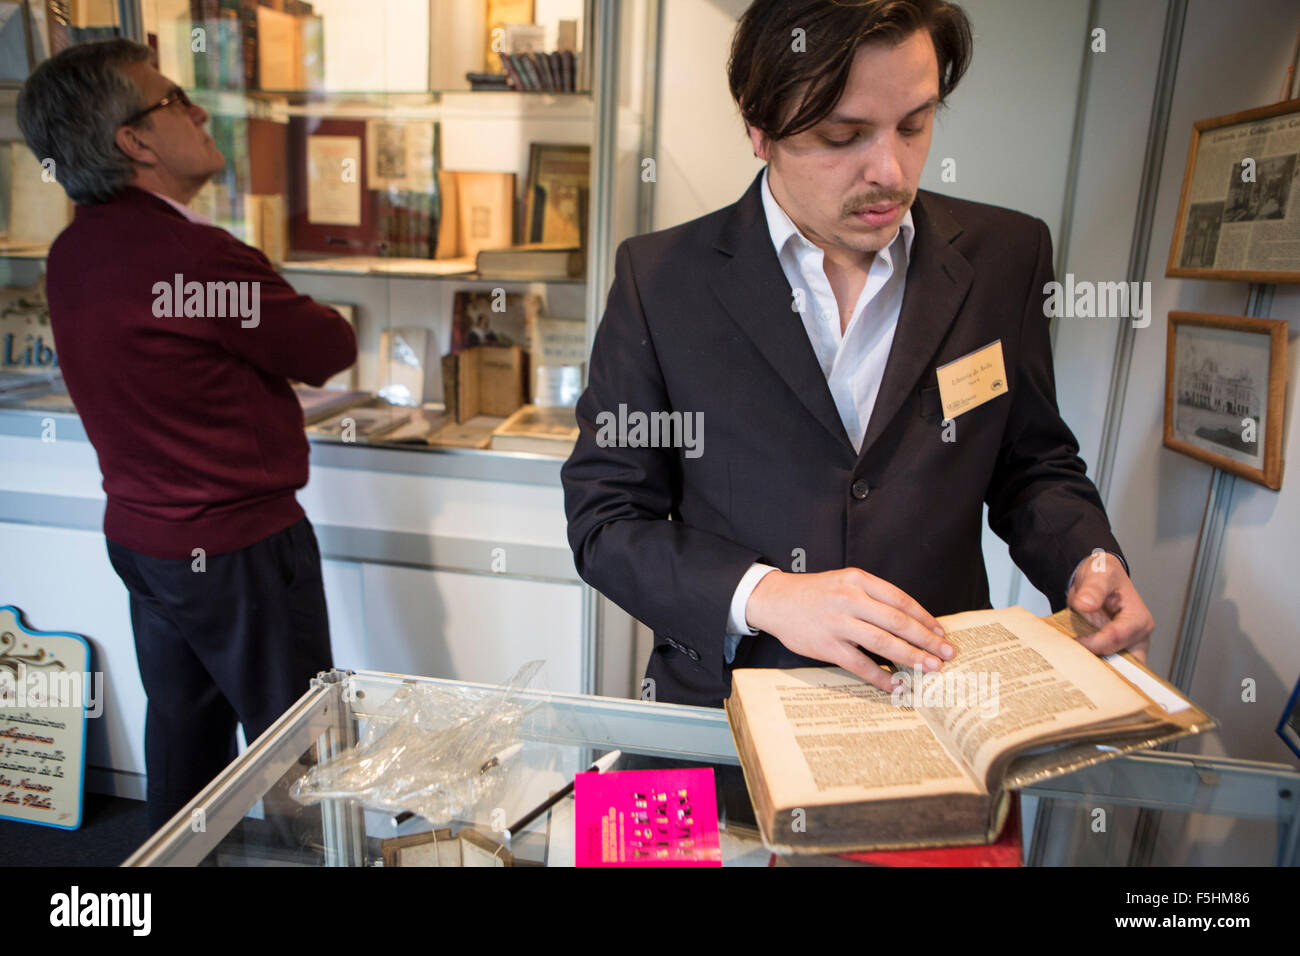 (151105) -- BUENOS AIRES, Nov. 5, 2015 (Xinhua) -- An exhibitor reads a German book of ophthalmology of 1687, during the 9th Ancient Book Fair, in Buenos Aires, capital of Argentina, on Nov. 4, 2015. According to local press, the fair organized by the Antiquarian Booksellers Association gathered books of the 15th century as well as engravings, maps, ancient photographs and posters. (Xinhua/Martin Zabala) Stock Photo